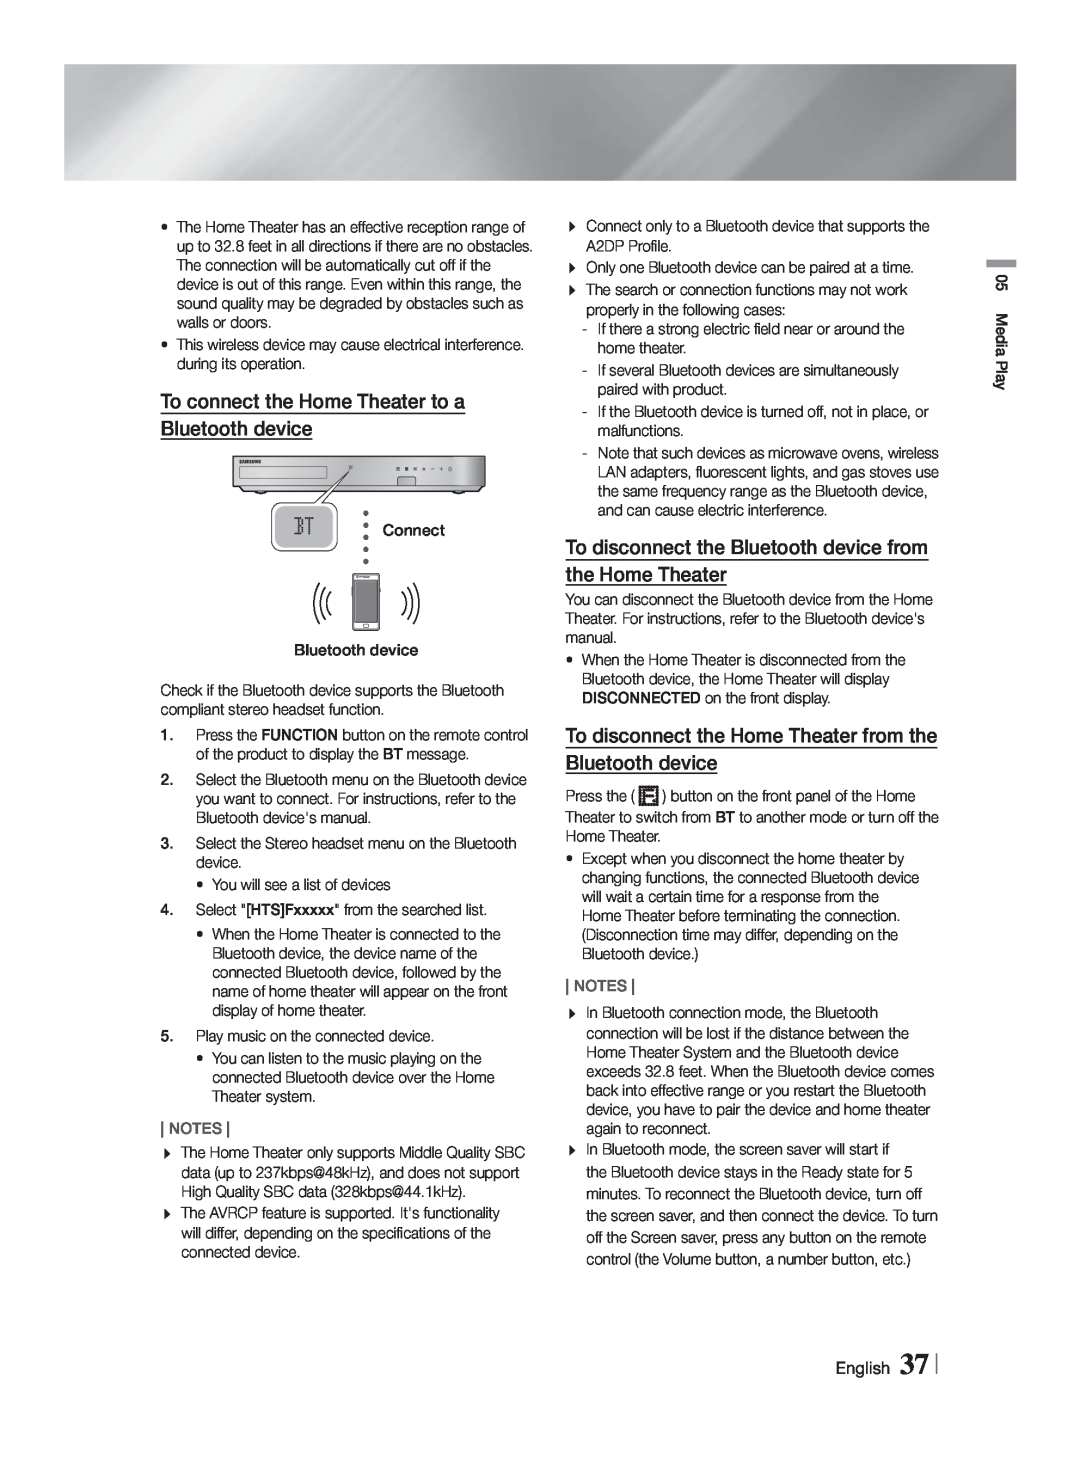 Samsung HTF5500WZA, HT-F5500W user manual To connect the Home Theater to a Bluetooth device 